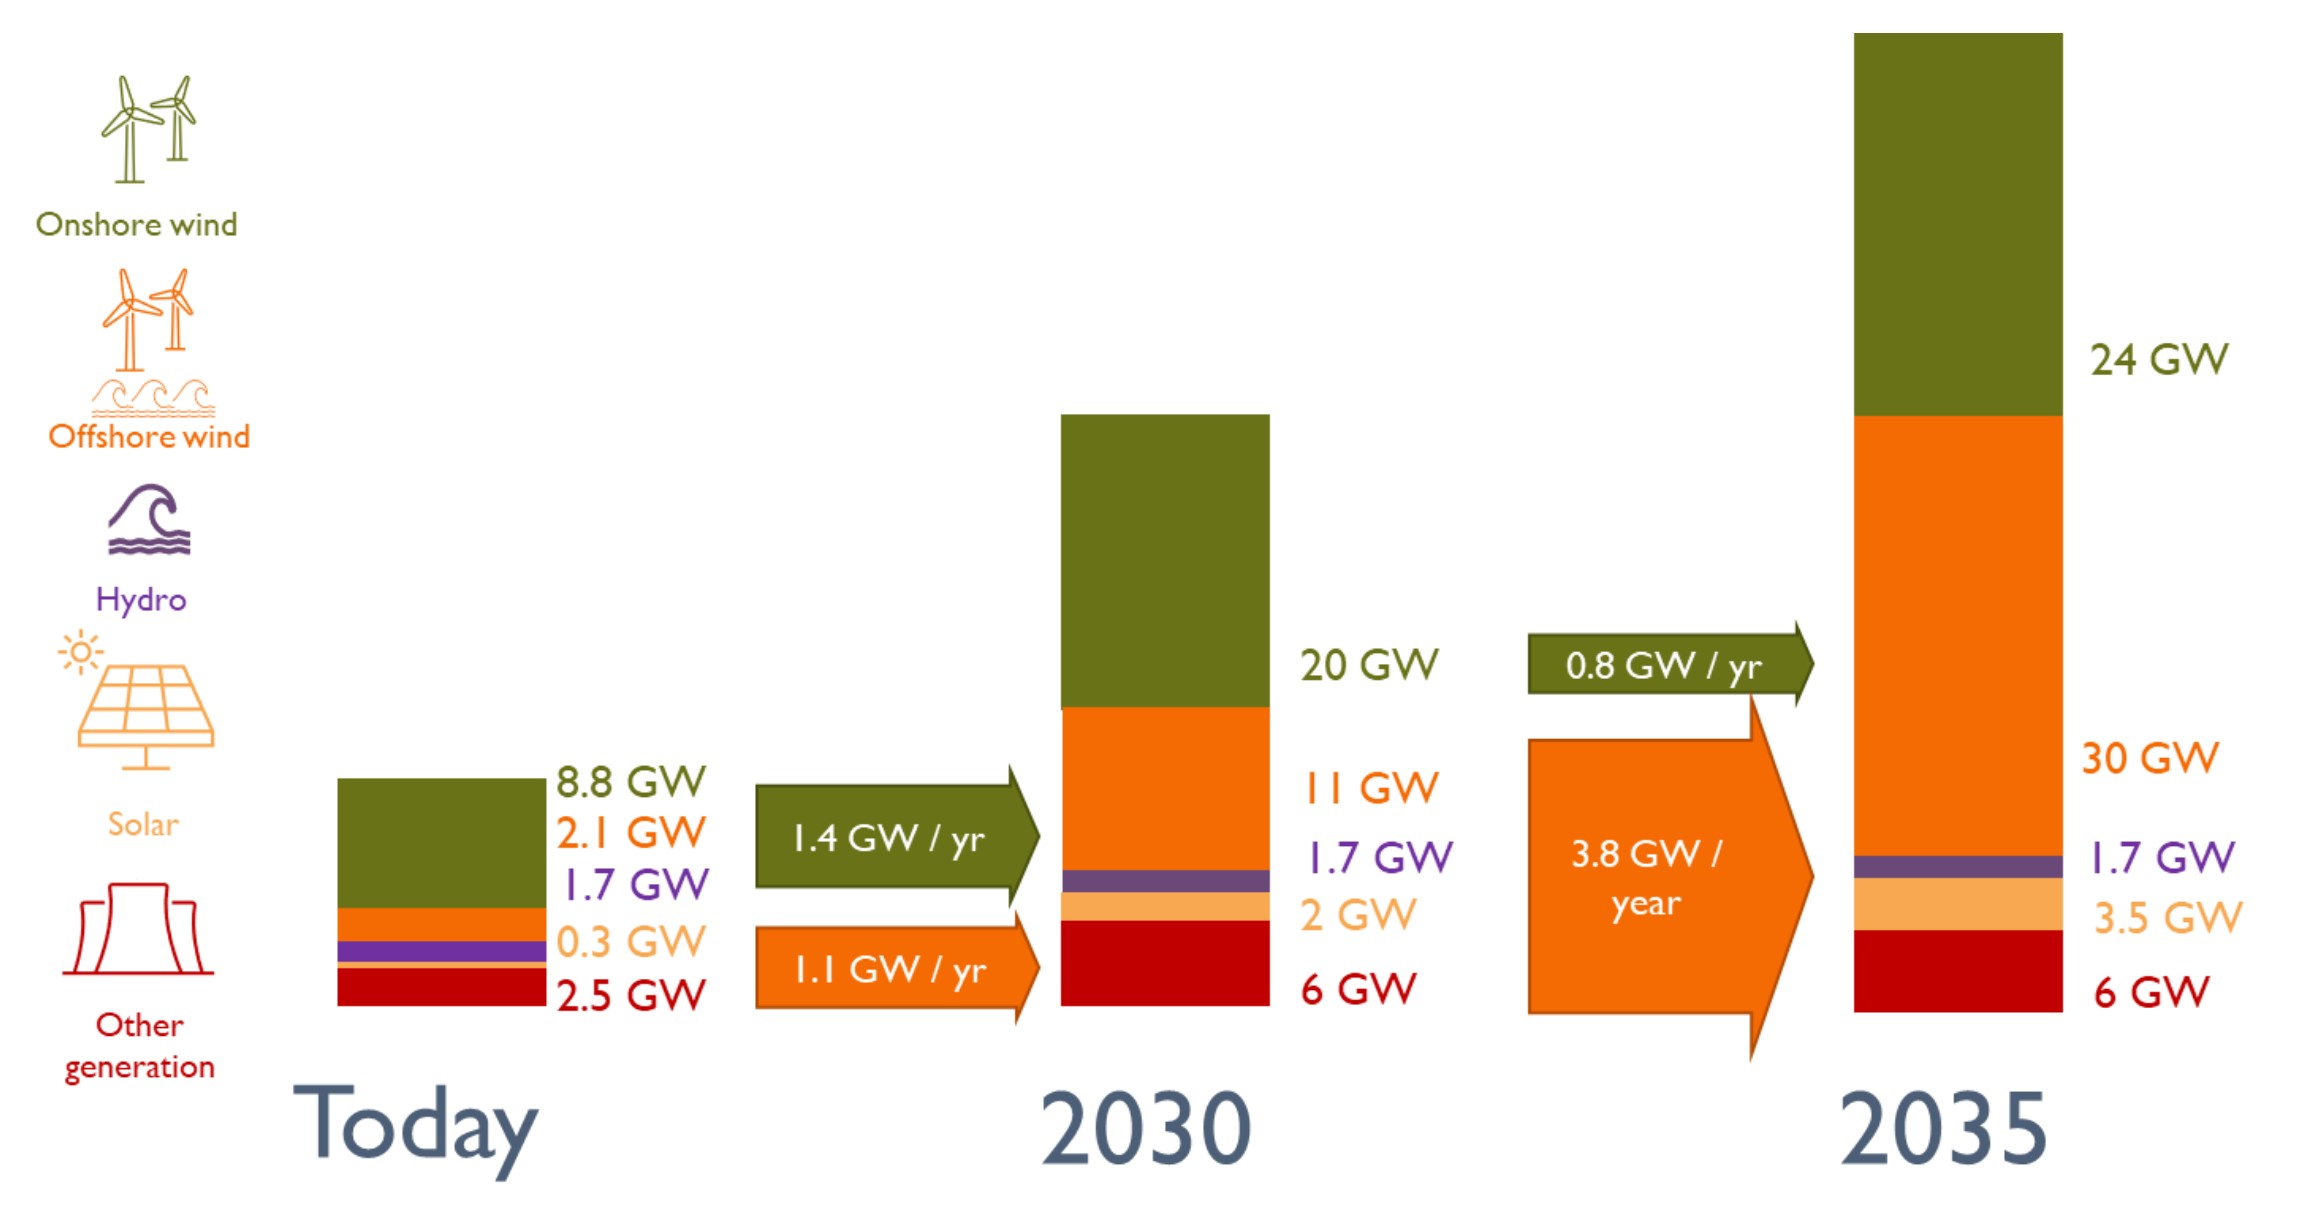 Figure 1: Illustrative pathway for Scottish generation capacity out to 2035 consistent with Scotland’s declared ambitions in 2030, NGESO’s net zero FES scenarios for 2035, and the Scottish whole energy system scenarios. Source: Scottish Futures Trust 